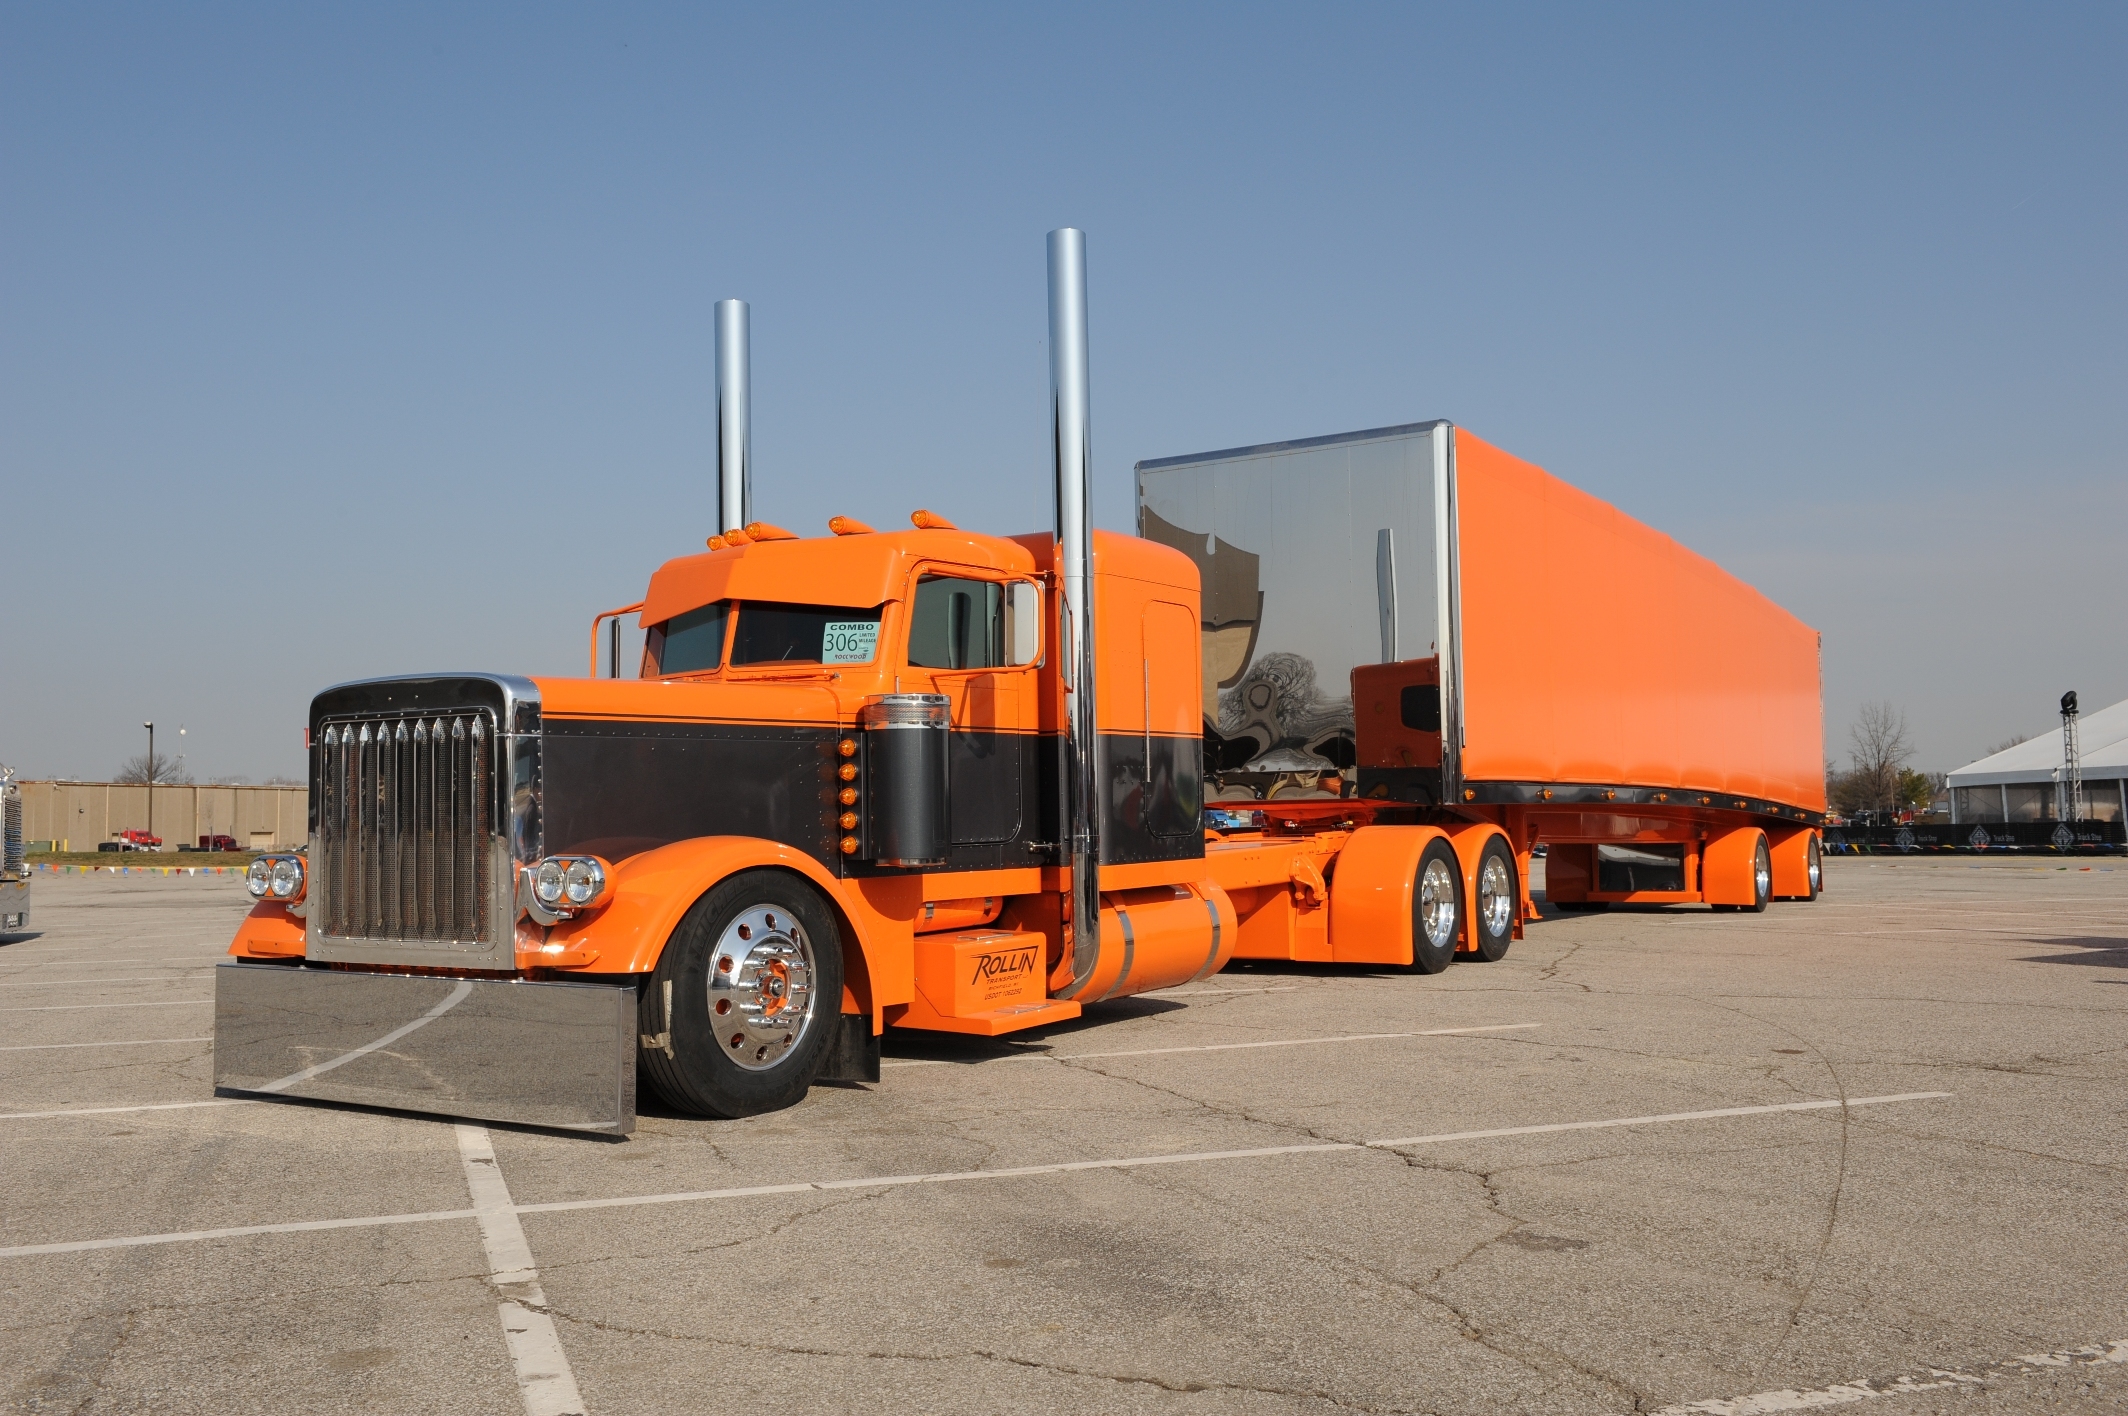 Wallpaper Peterbilt Truck Custom Car Pictures And Photos Other